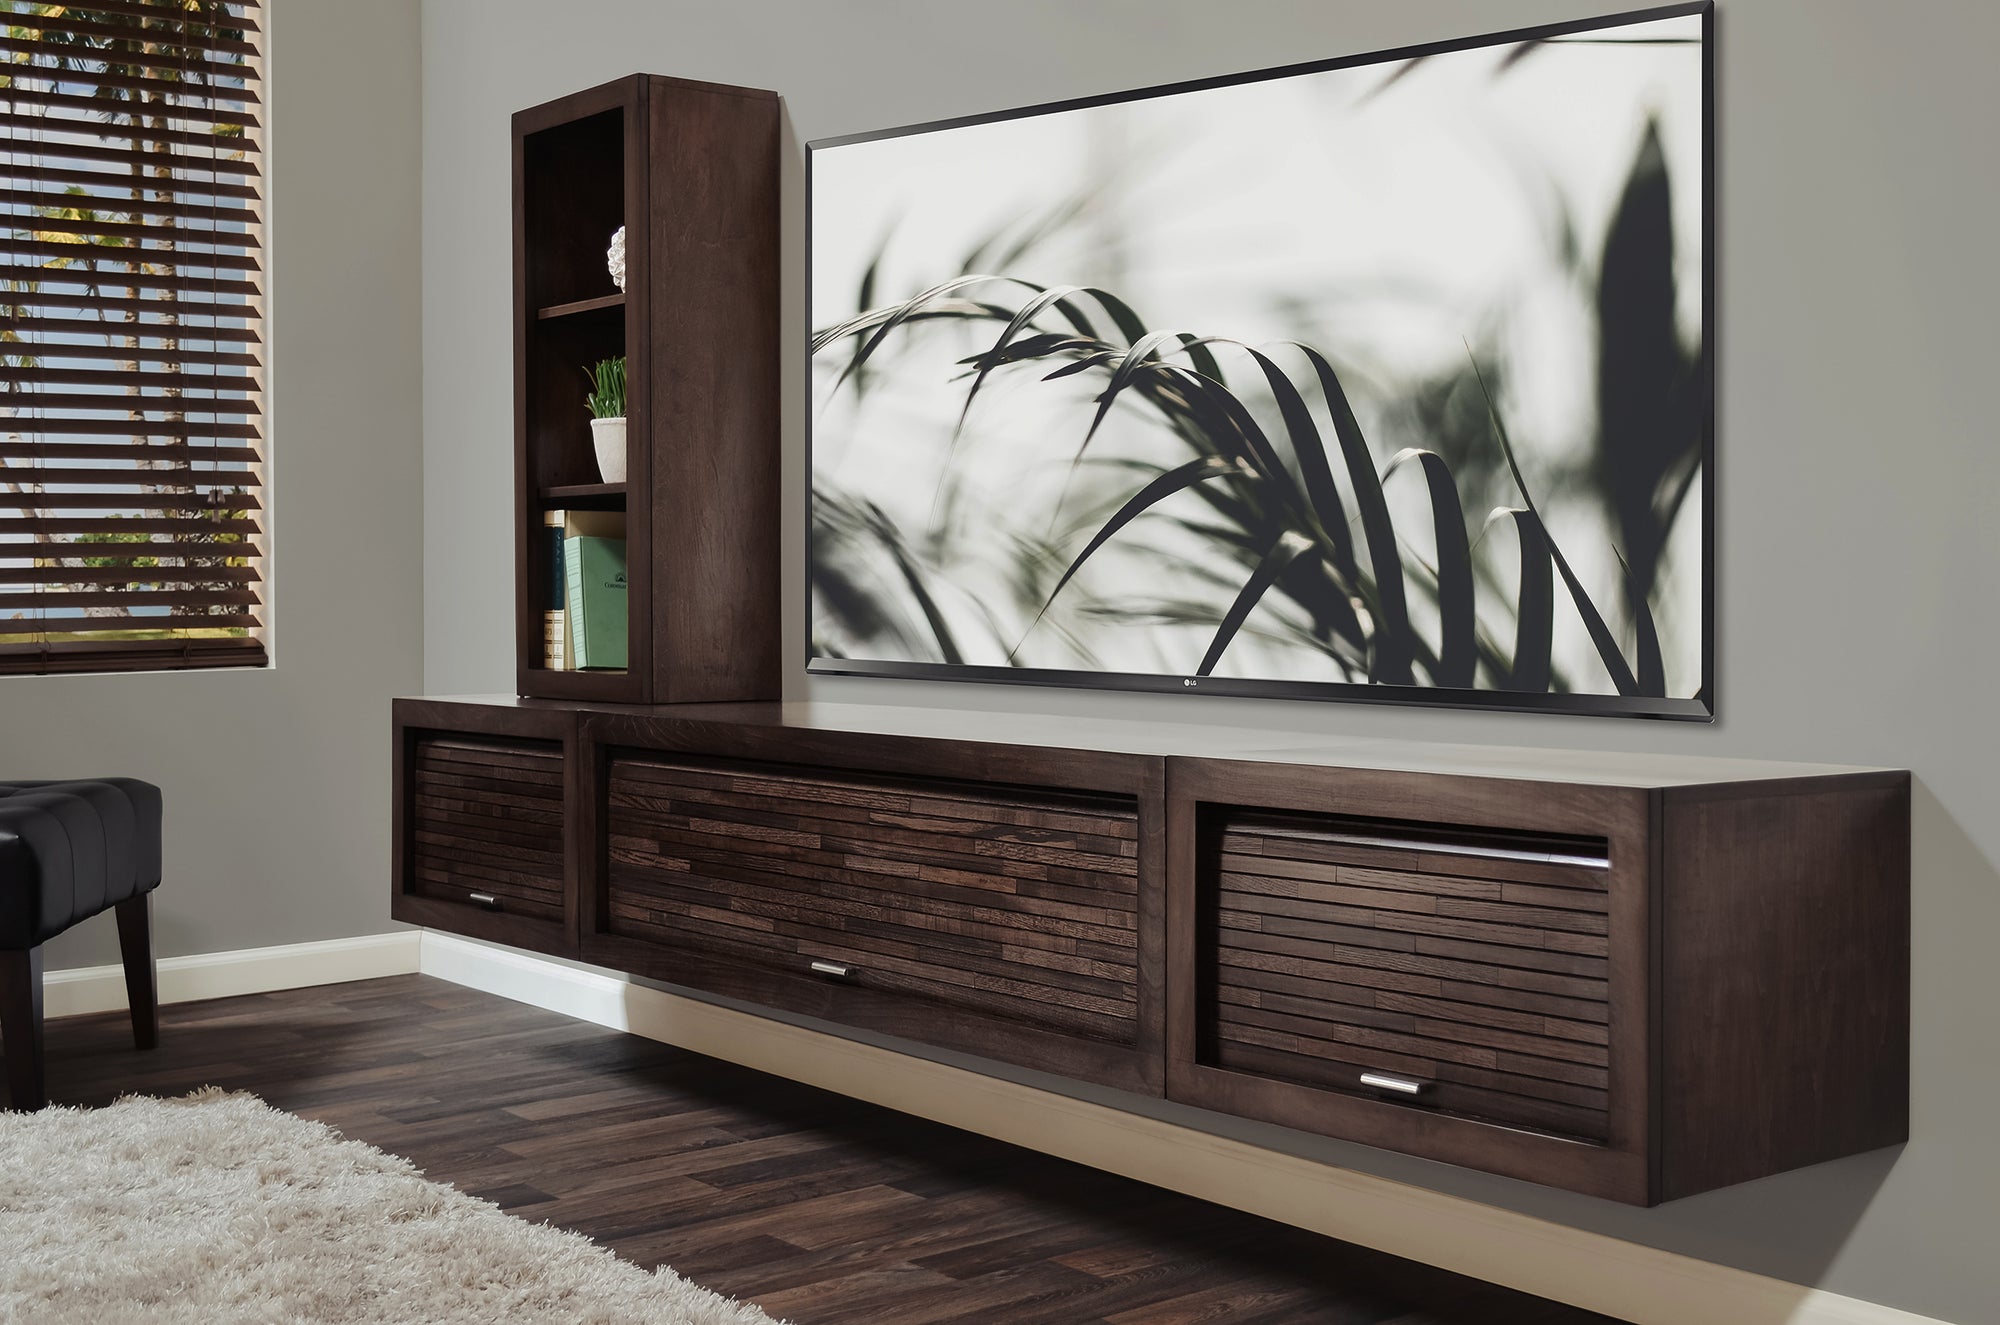 Woodwaves - Floating TV Stand - Wall Mounted Entertainment Center - ECO GEO Espresso